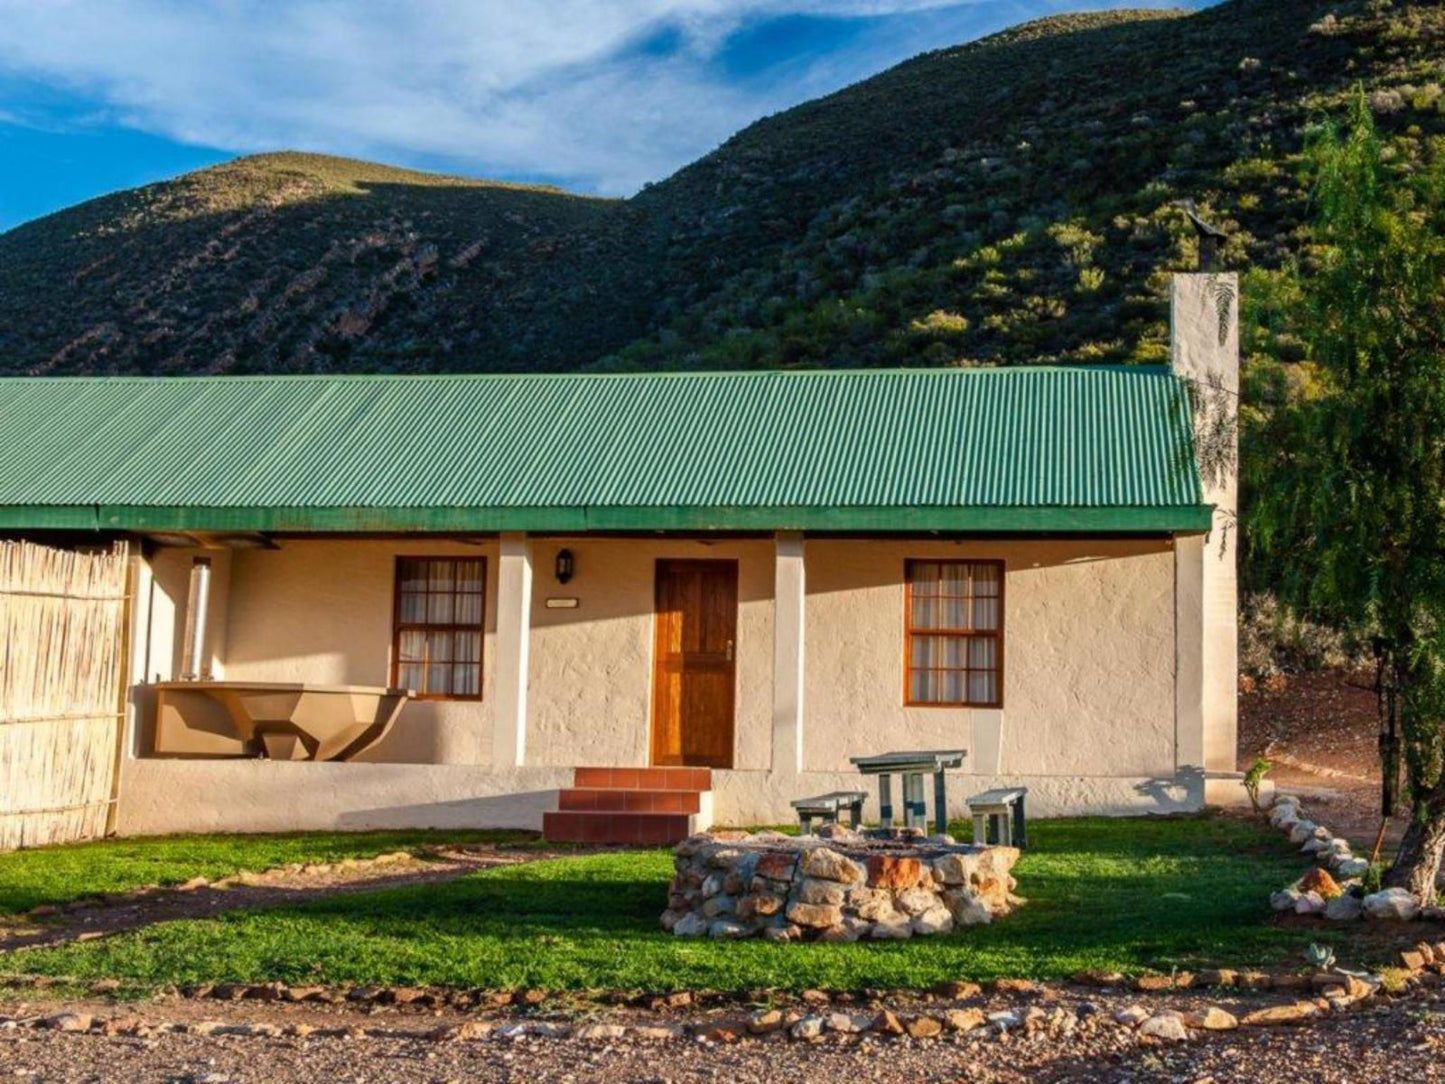 Rietfontein Guest Farm Ladismith Western Cape South Africa Complementary Colors, Cabin, Building, Architecture